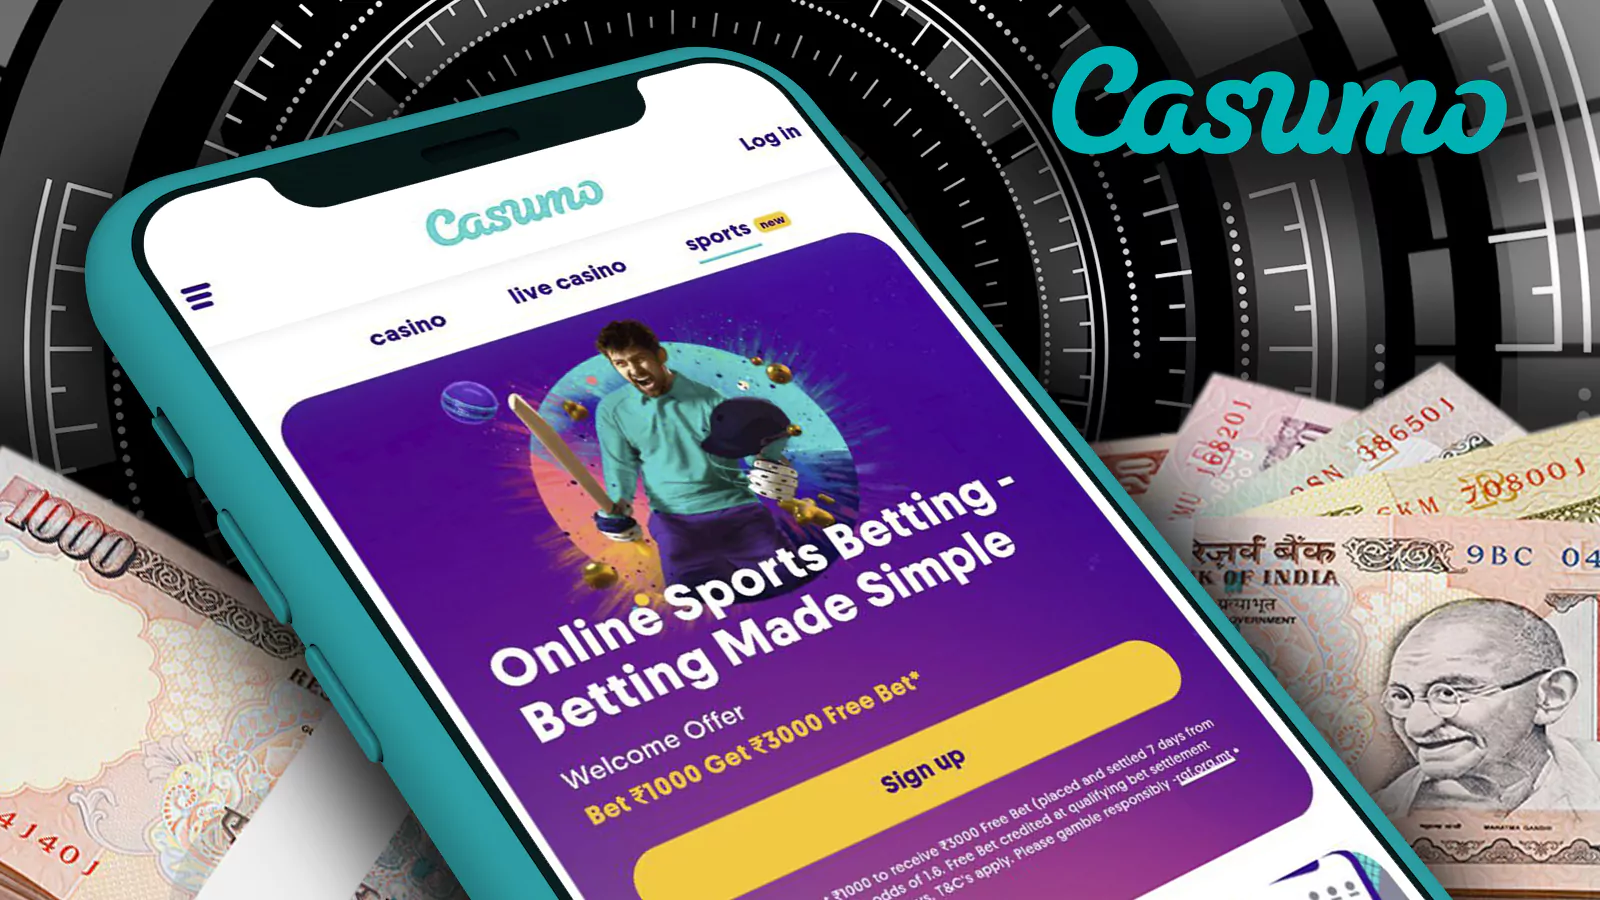 A unique welcome bonus for Casumo App users, thanks to which you get 3,000 Indian rupees into your gaming account in exchange for just 1,000 rupees.